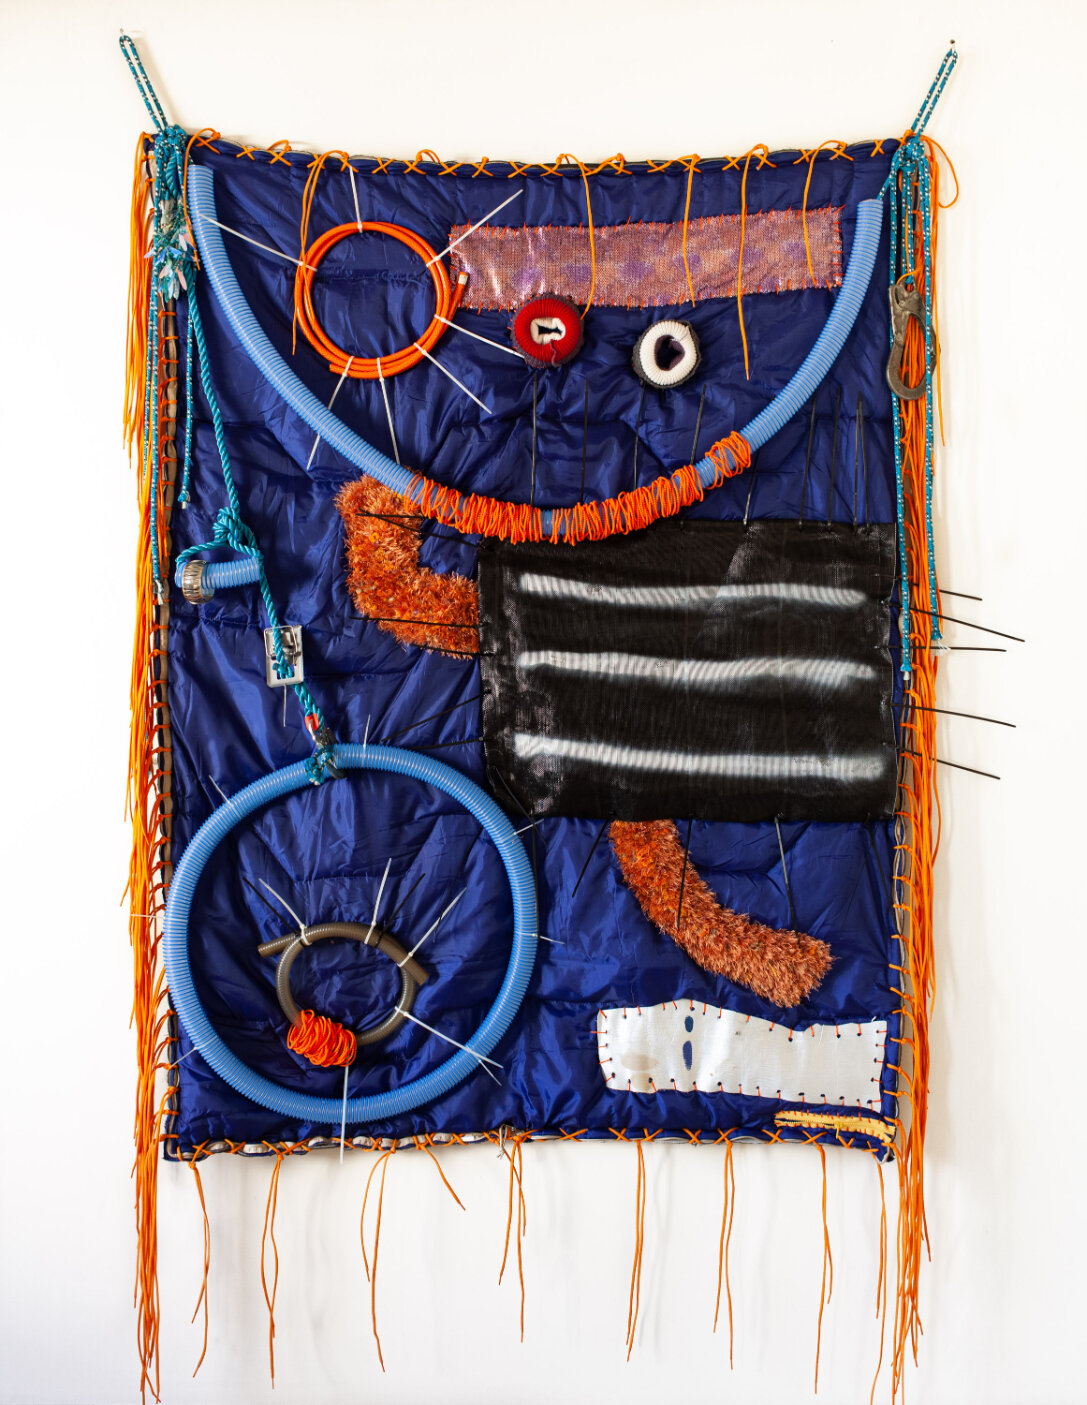  Randolpho Lamonier&nbsp;  Aedes Aegypti , 2019&nbsp; Mixed media (Rope, plastic, leather, painting and objects on fabric) 94.5 x 55 in.&nbsp; RL001     